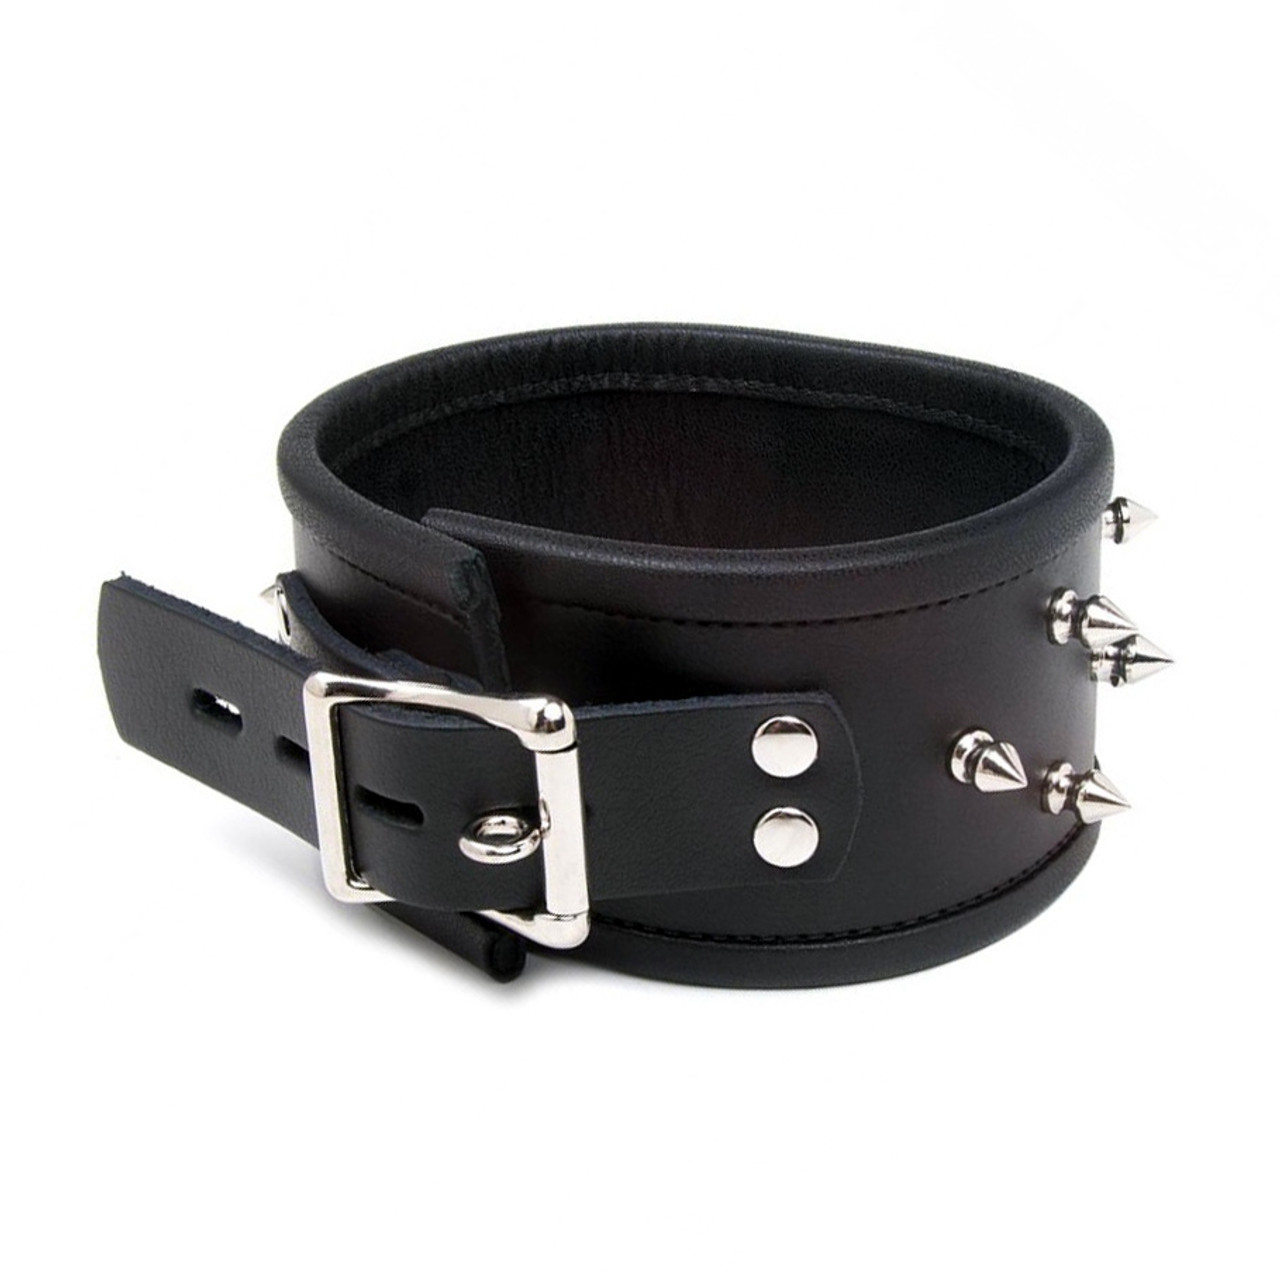 Buy the Alpha Dog Spiked Black Leather Adjustable Heavy Duty Locking ...